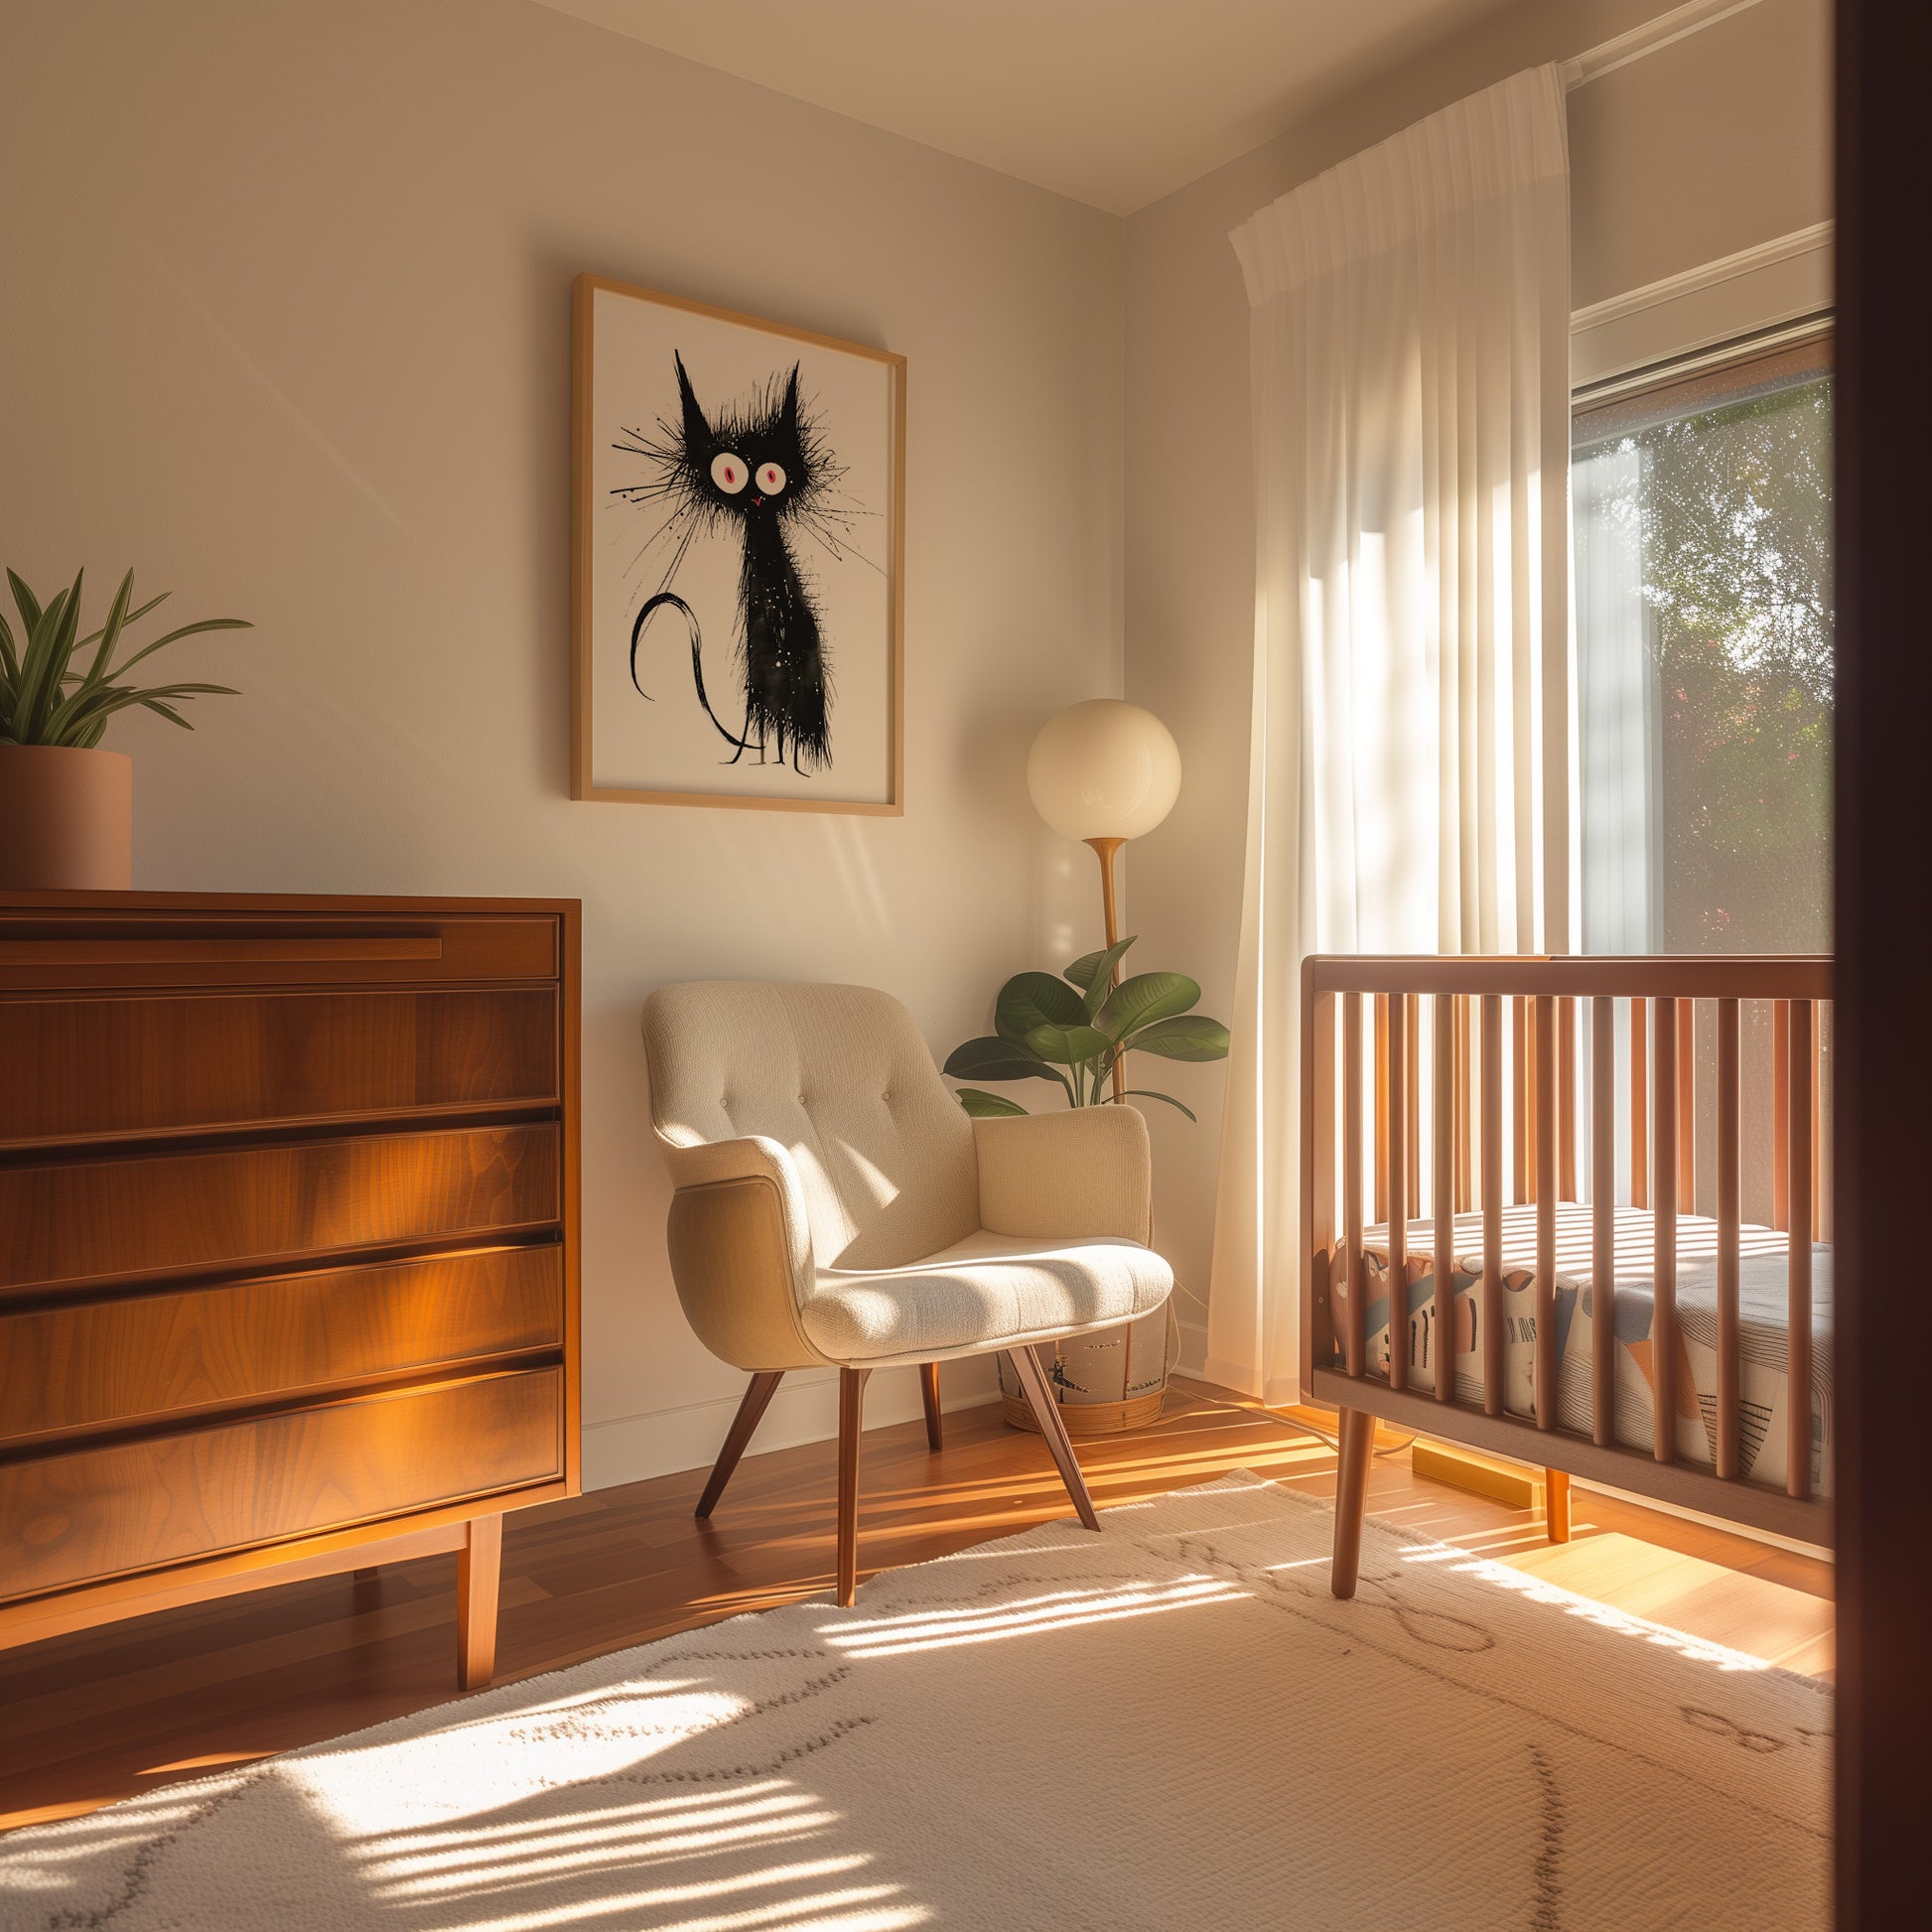 Cozy nursery room with a crib, armchair, and cat artwork at sunset.